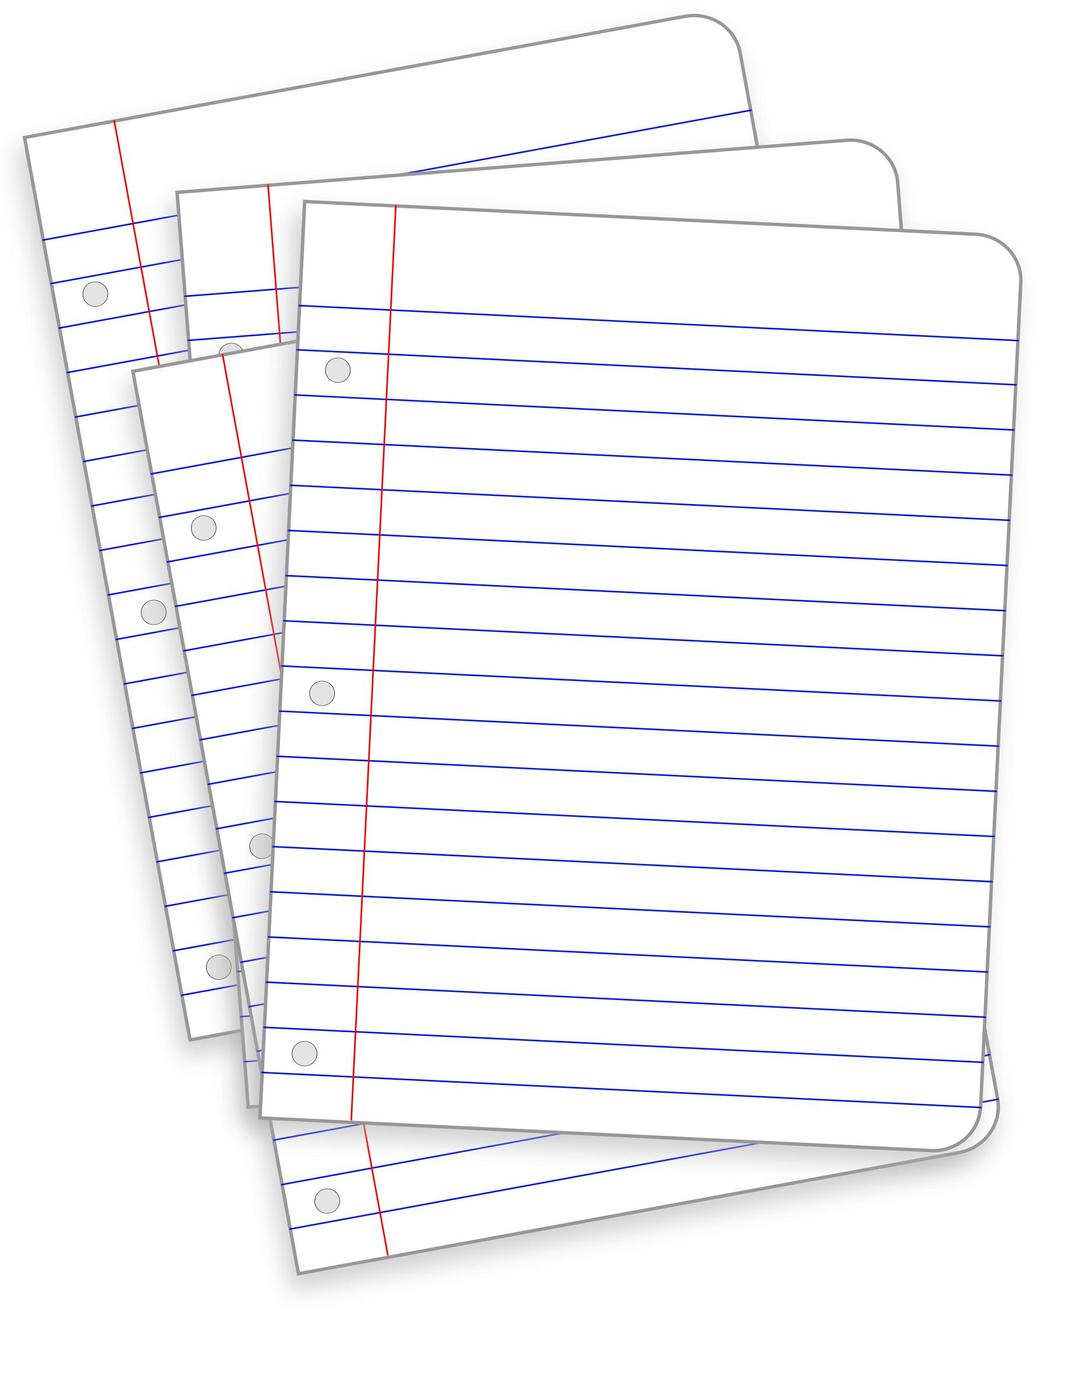 Messy Lined papers png transparent